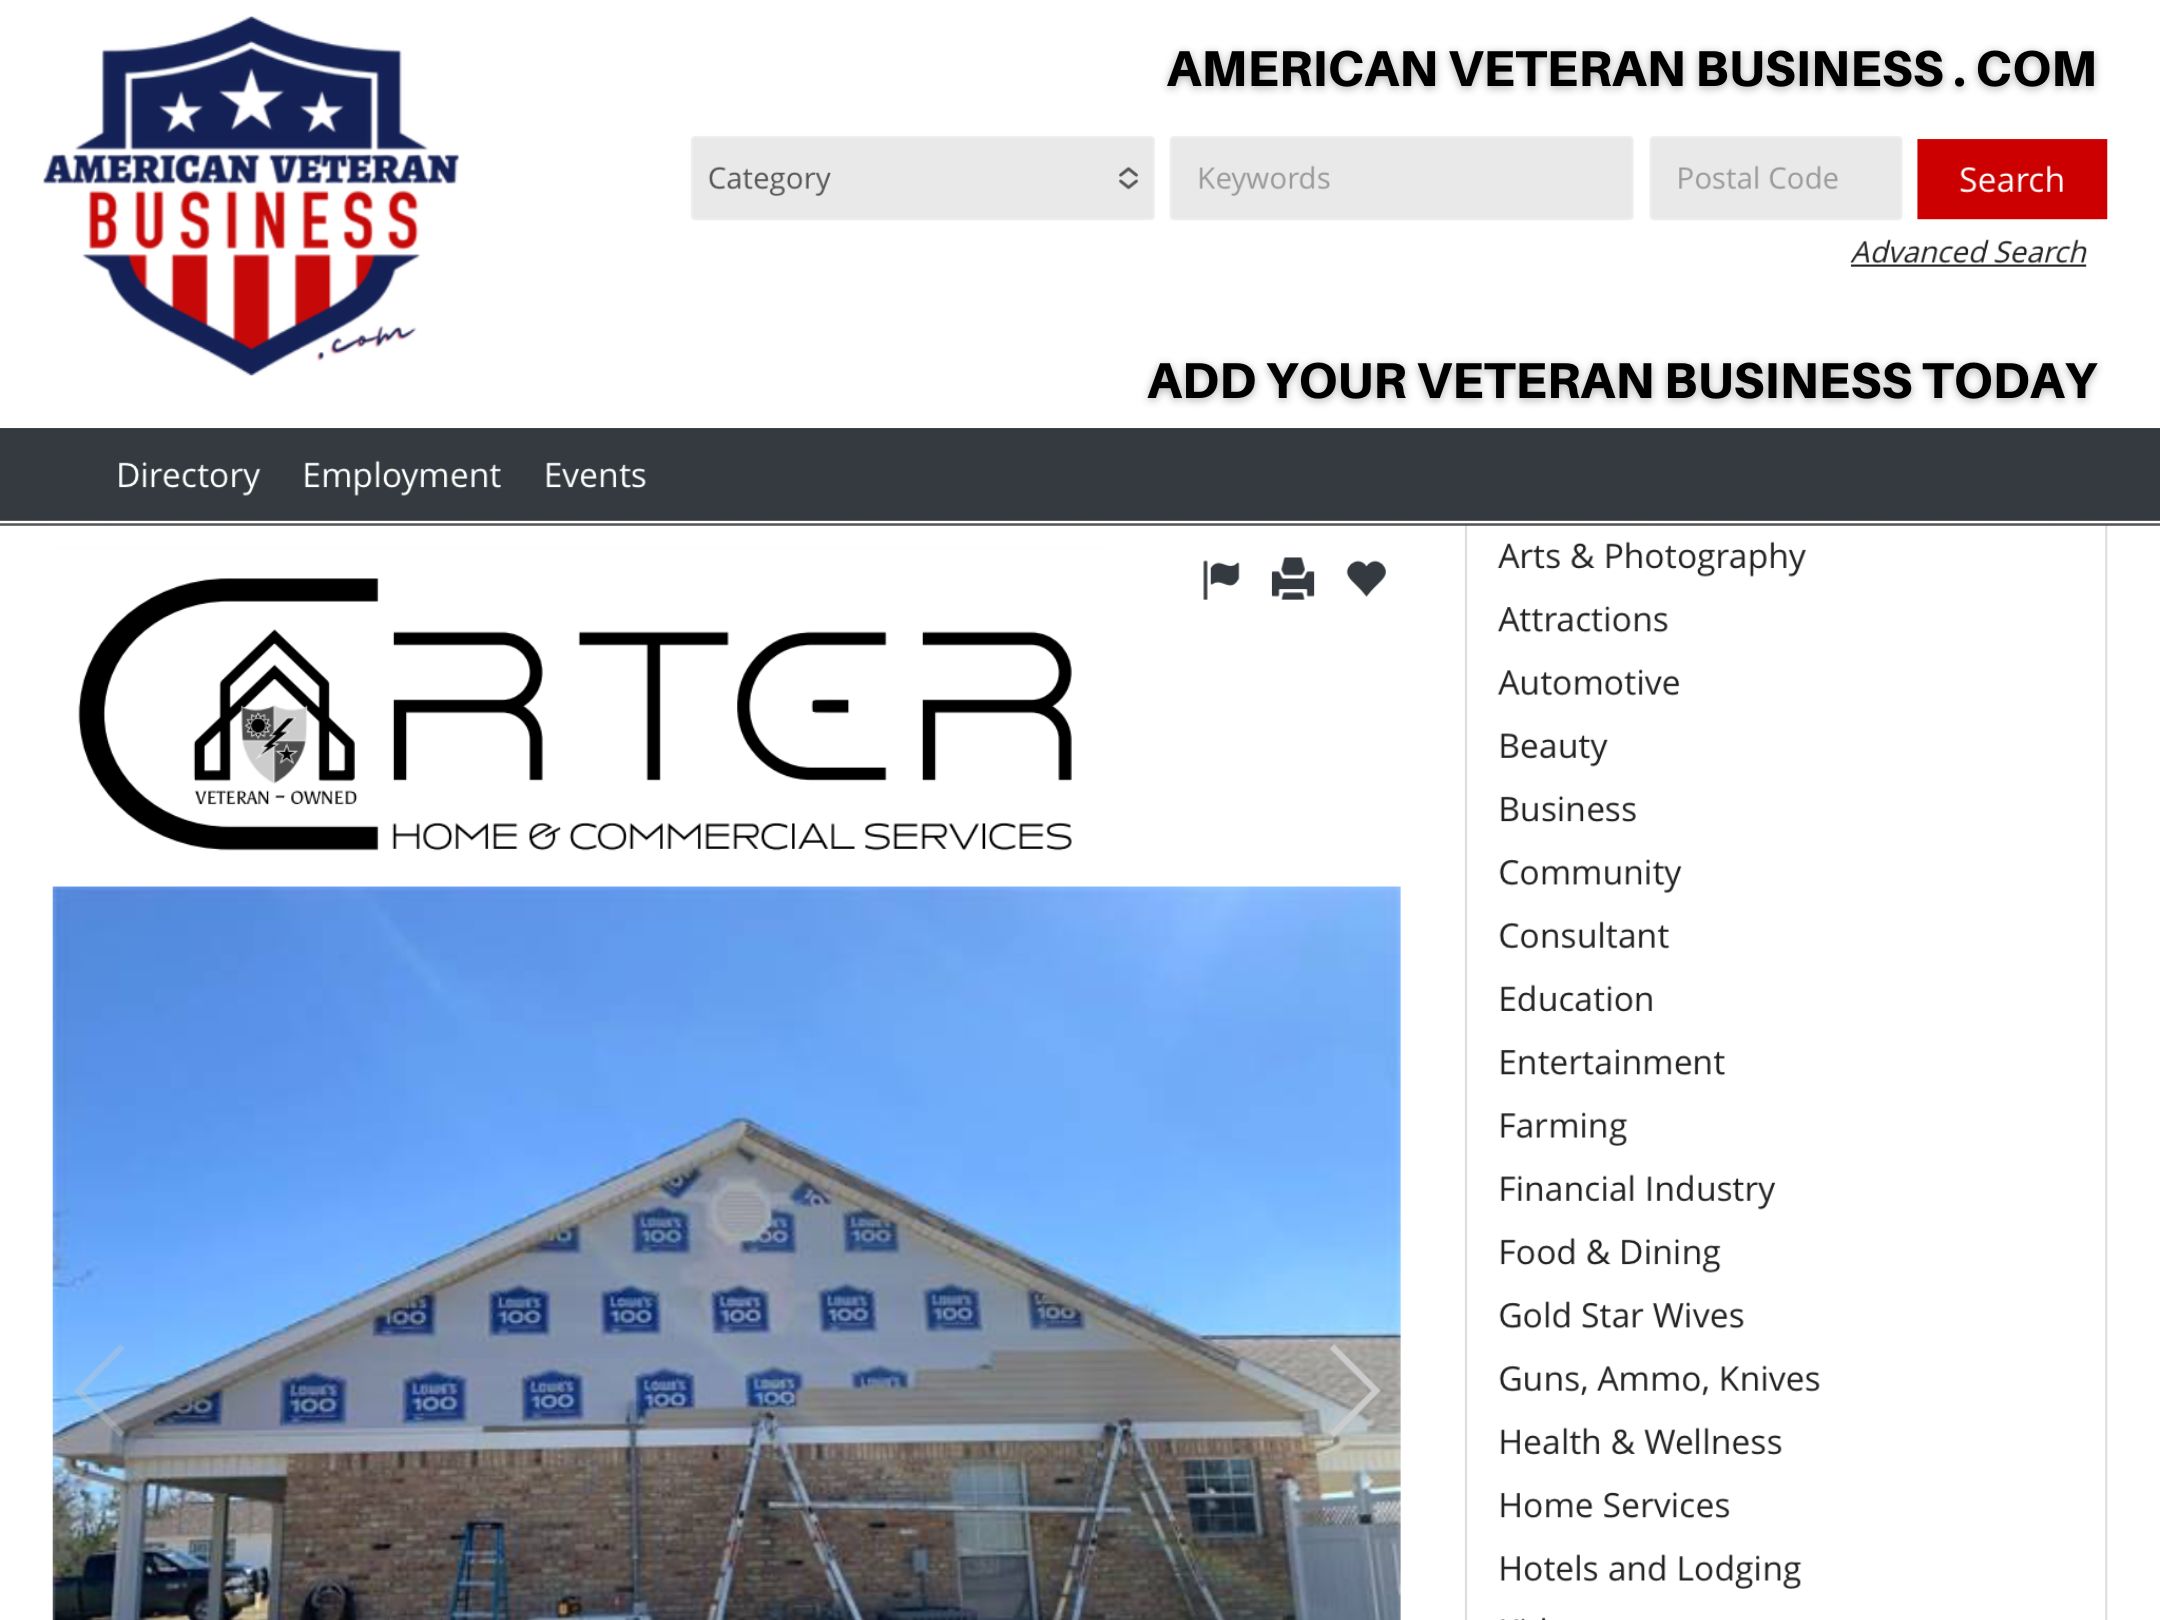 Carter Home and Commercial on AmericanVeteranBusiness.com